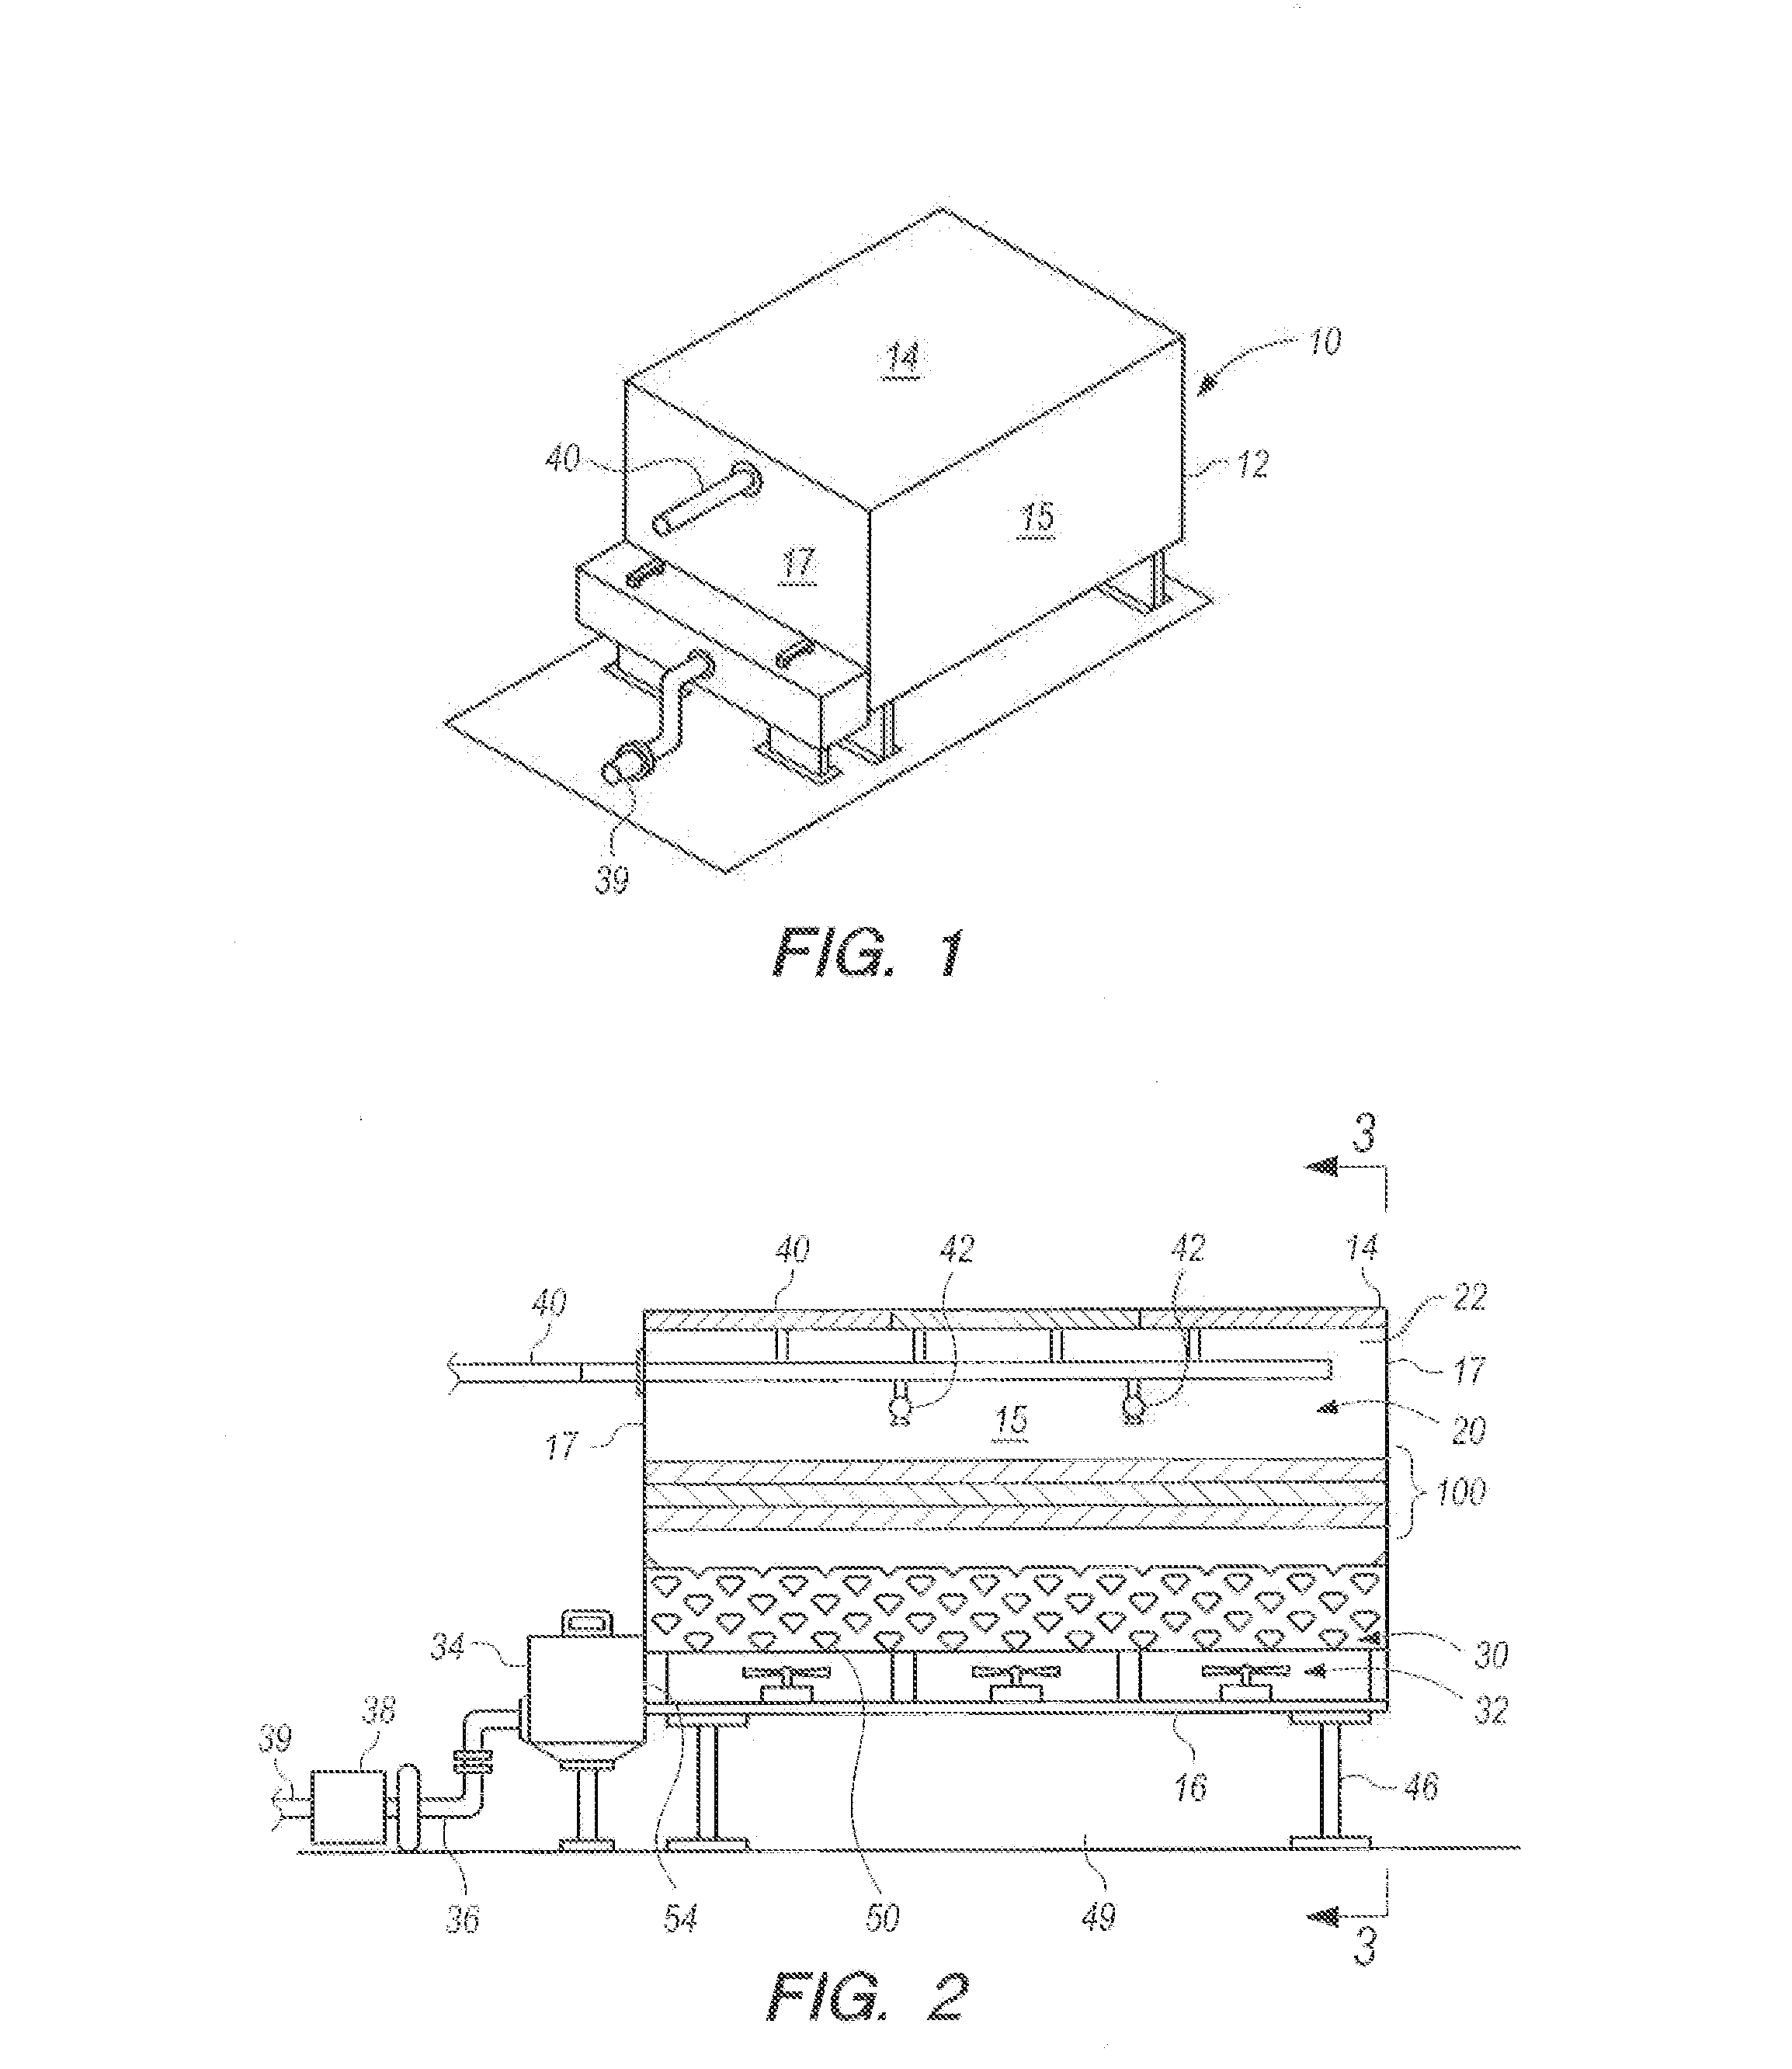 Direct Forced Draft Fluid Cooling Tower